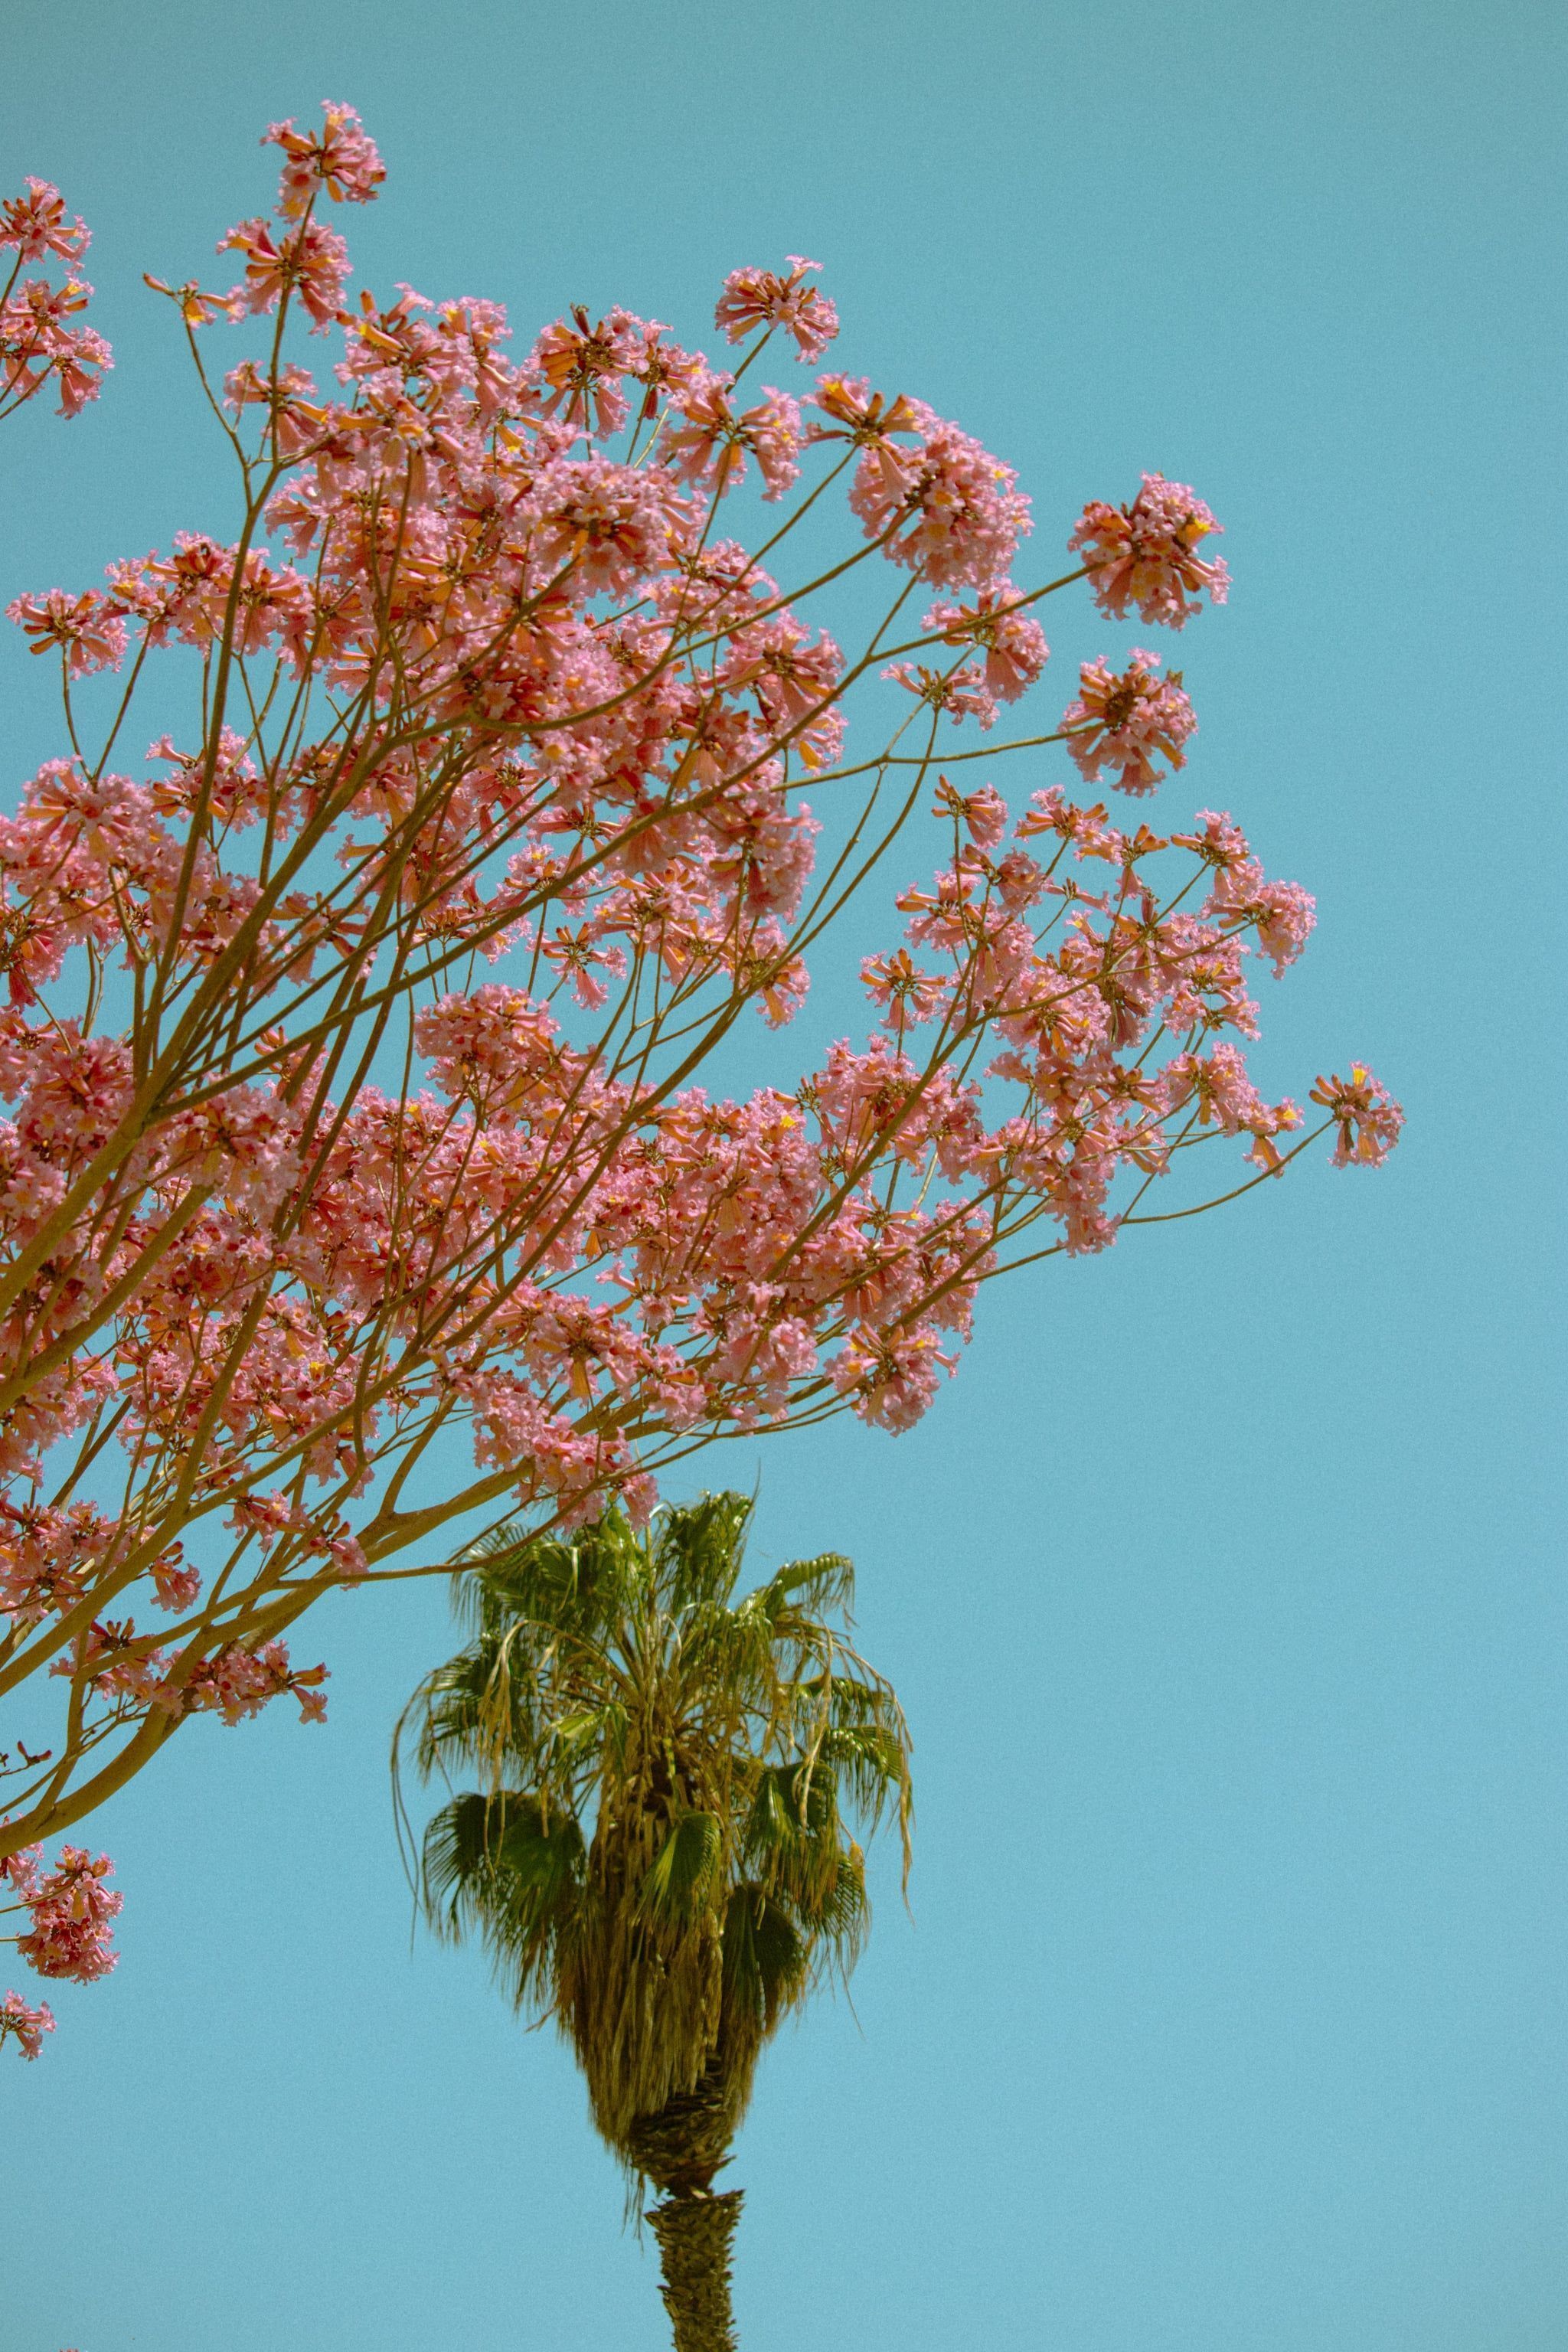 A tree with pink flowers and a palm tree in the background. - Teal, summer, plants, palm tree, bright, beautiful, warm, pretty, cherry blossom, TikTok